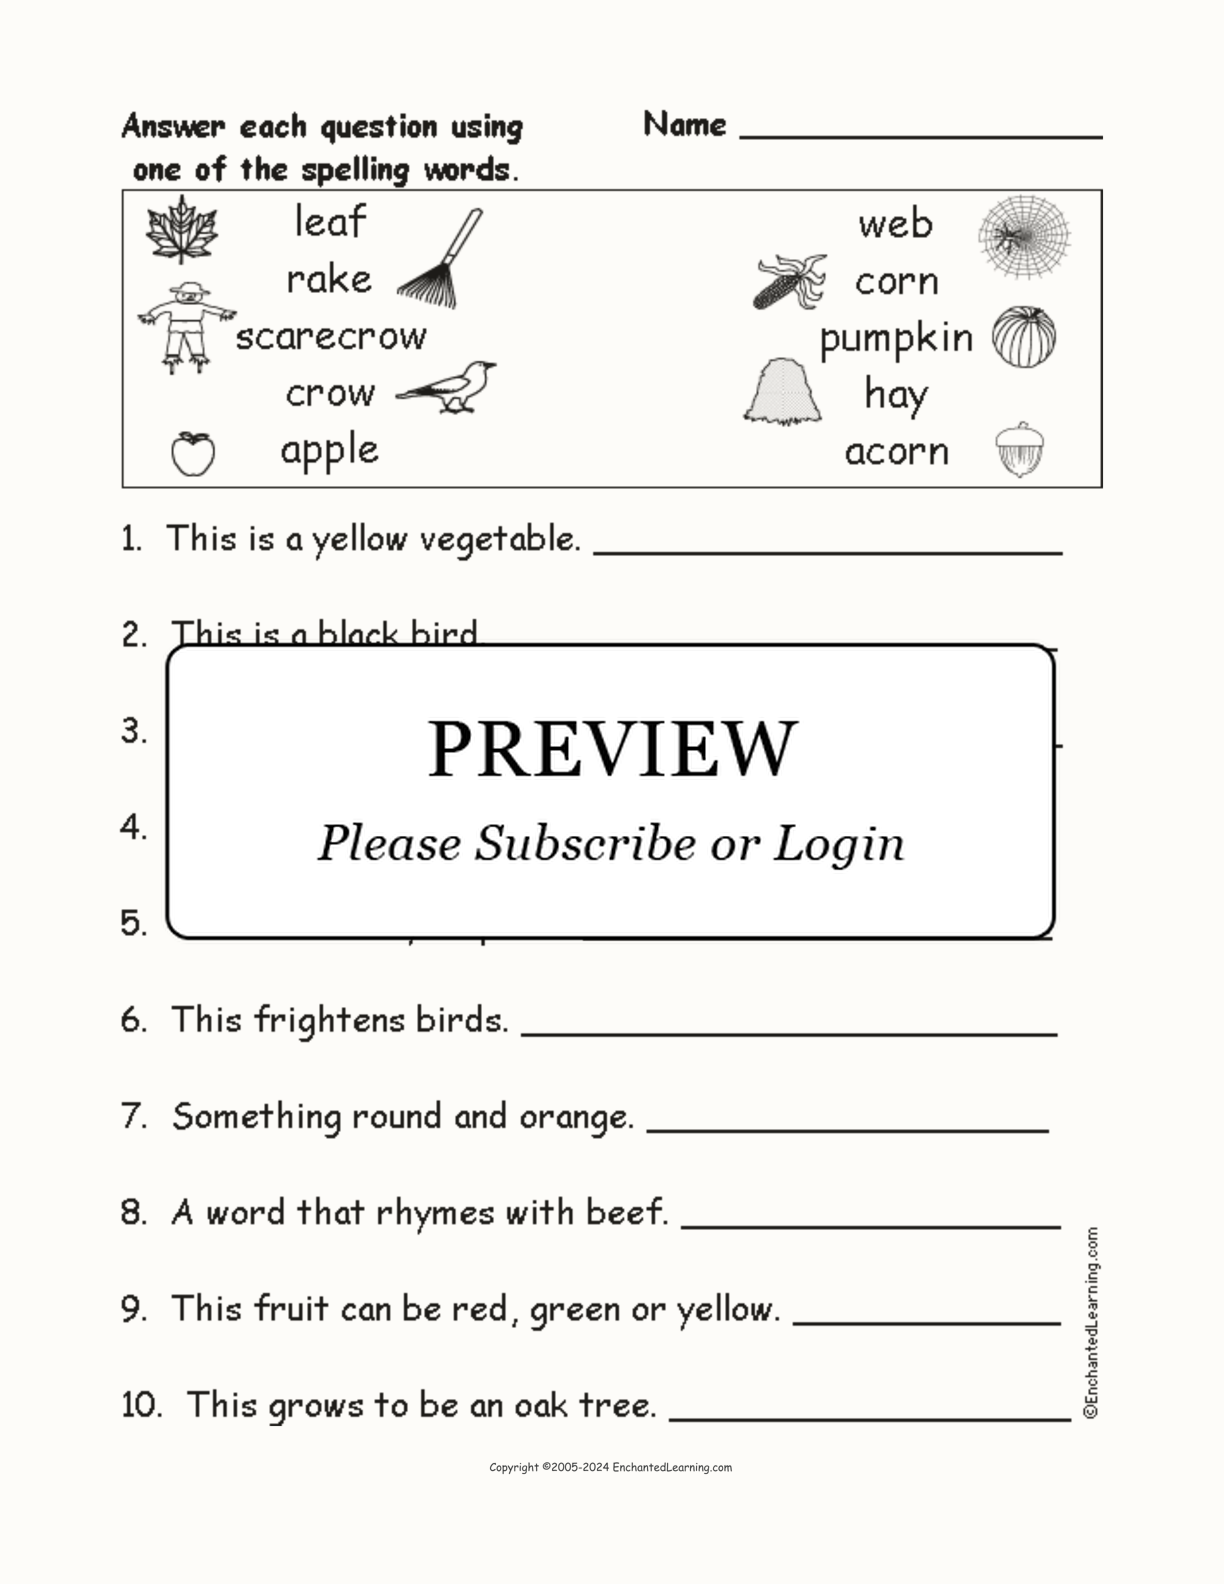 Fall Spelling Word Questions interactive worksheet page 1